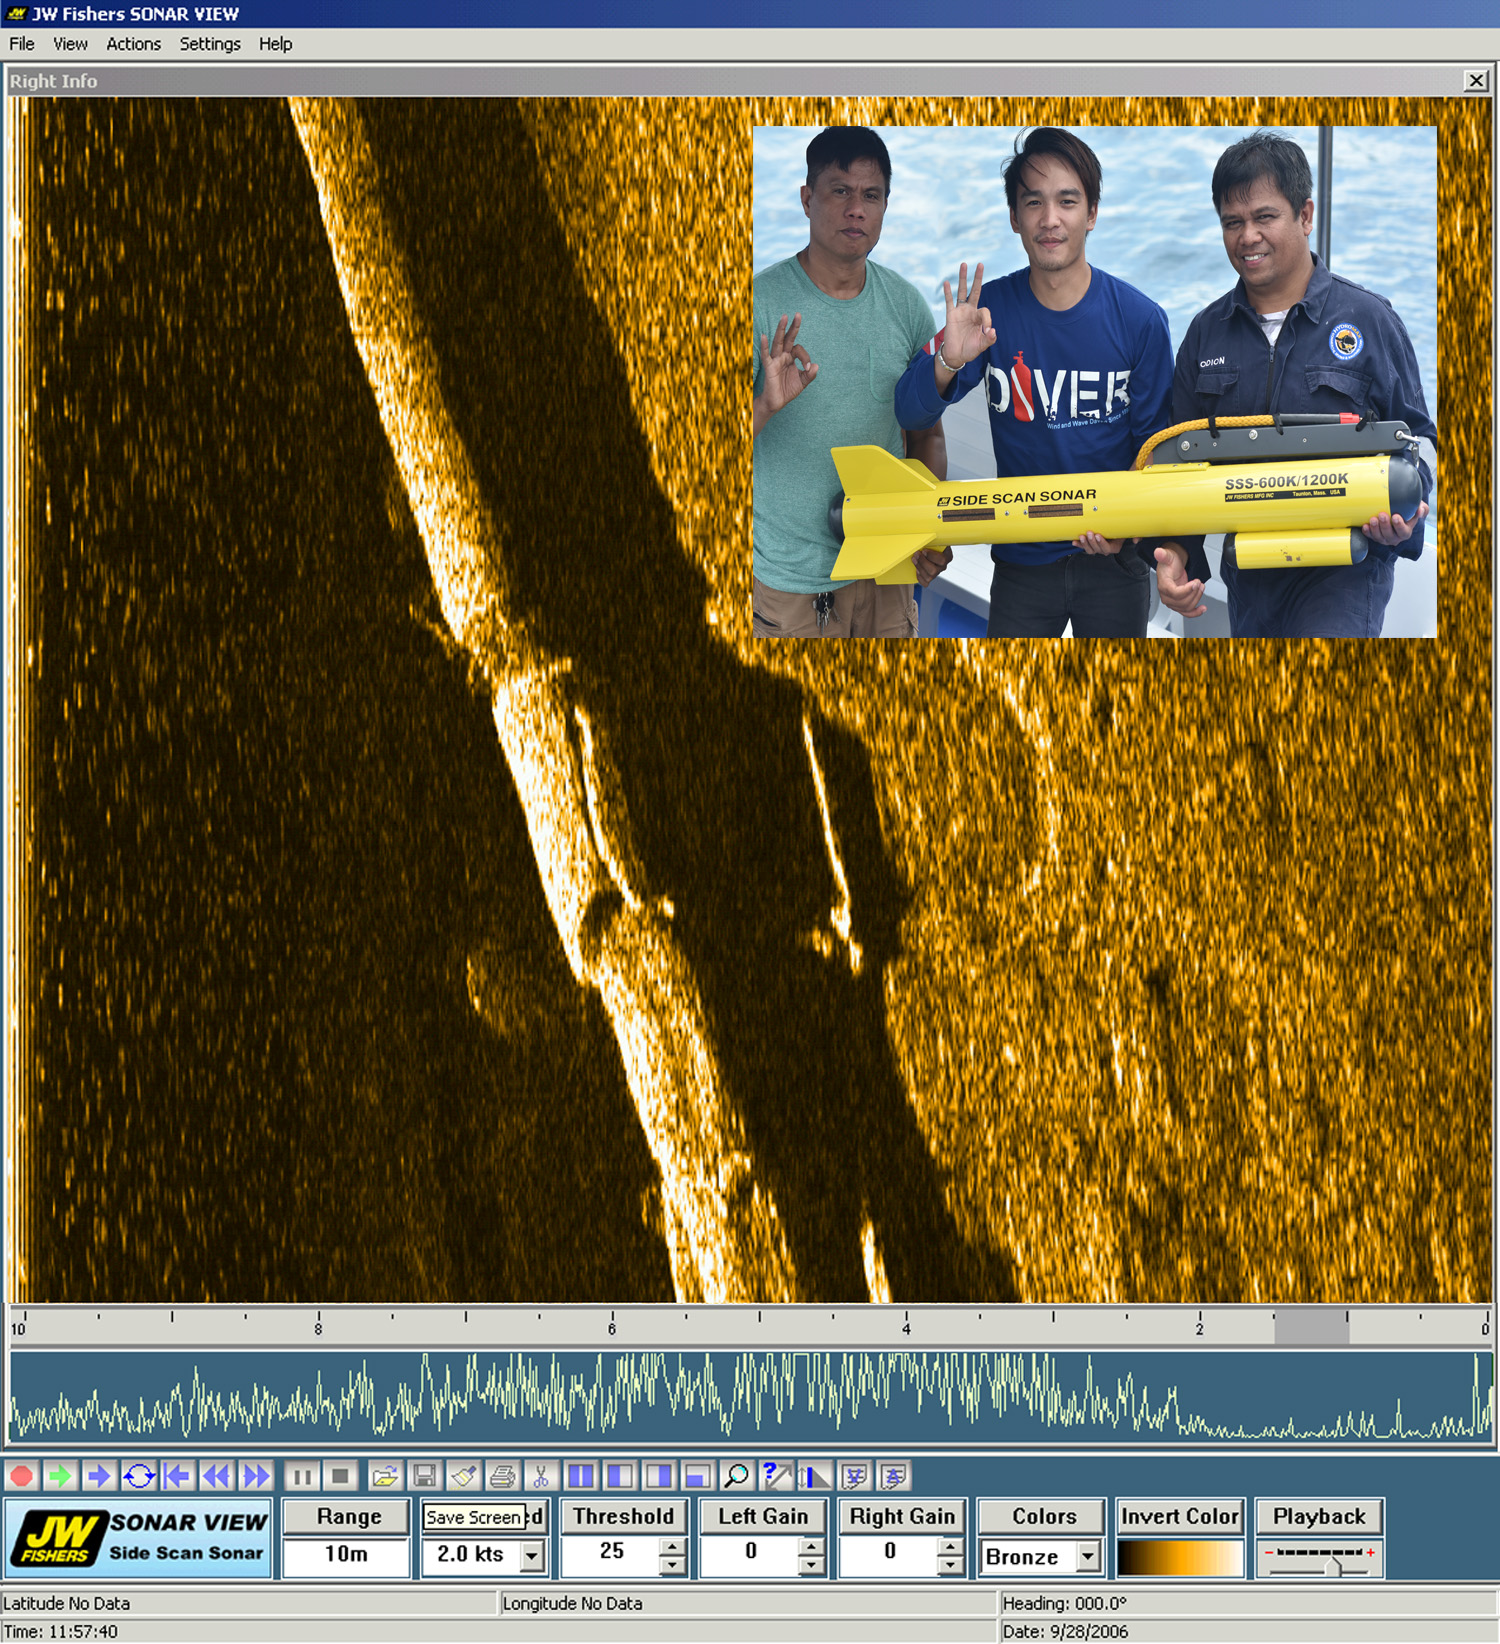 Sonar image of concrete covered pipeline inset - Hydromax dive team with their Fisher side scan